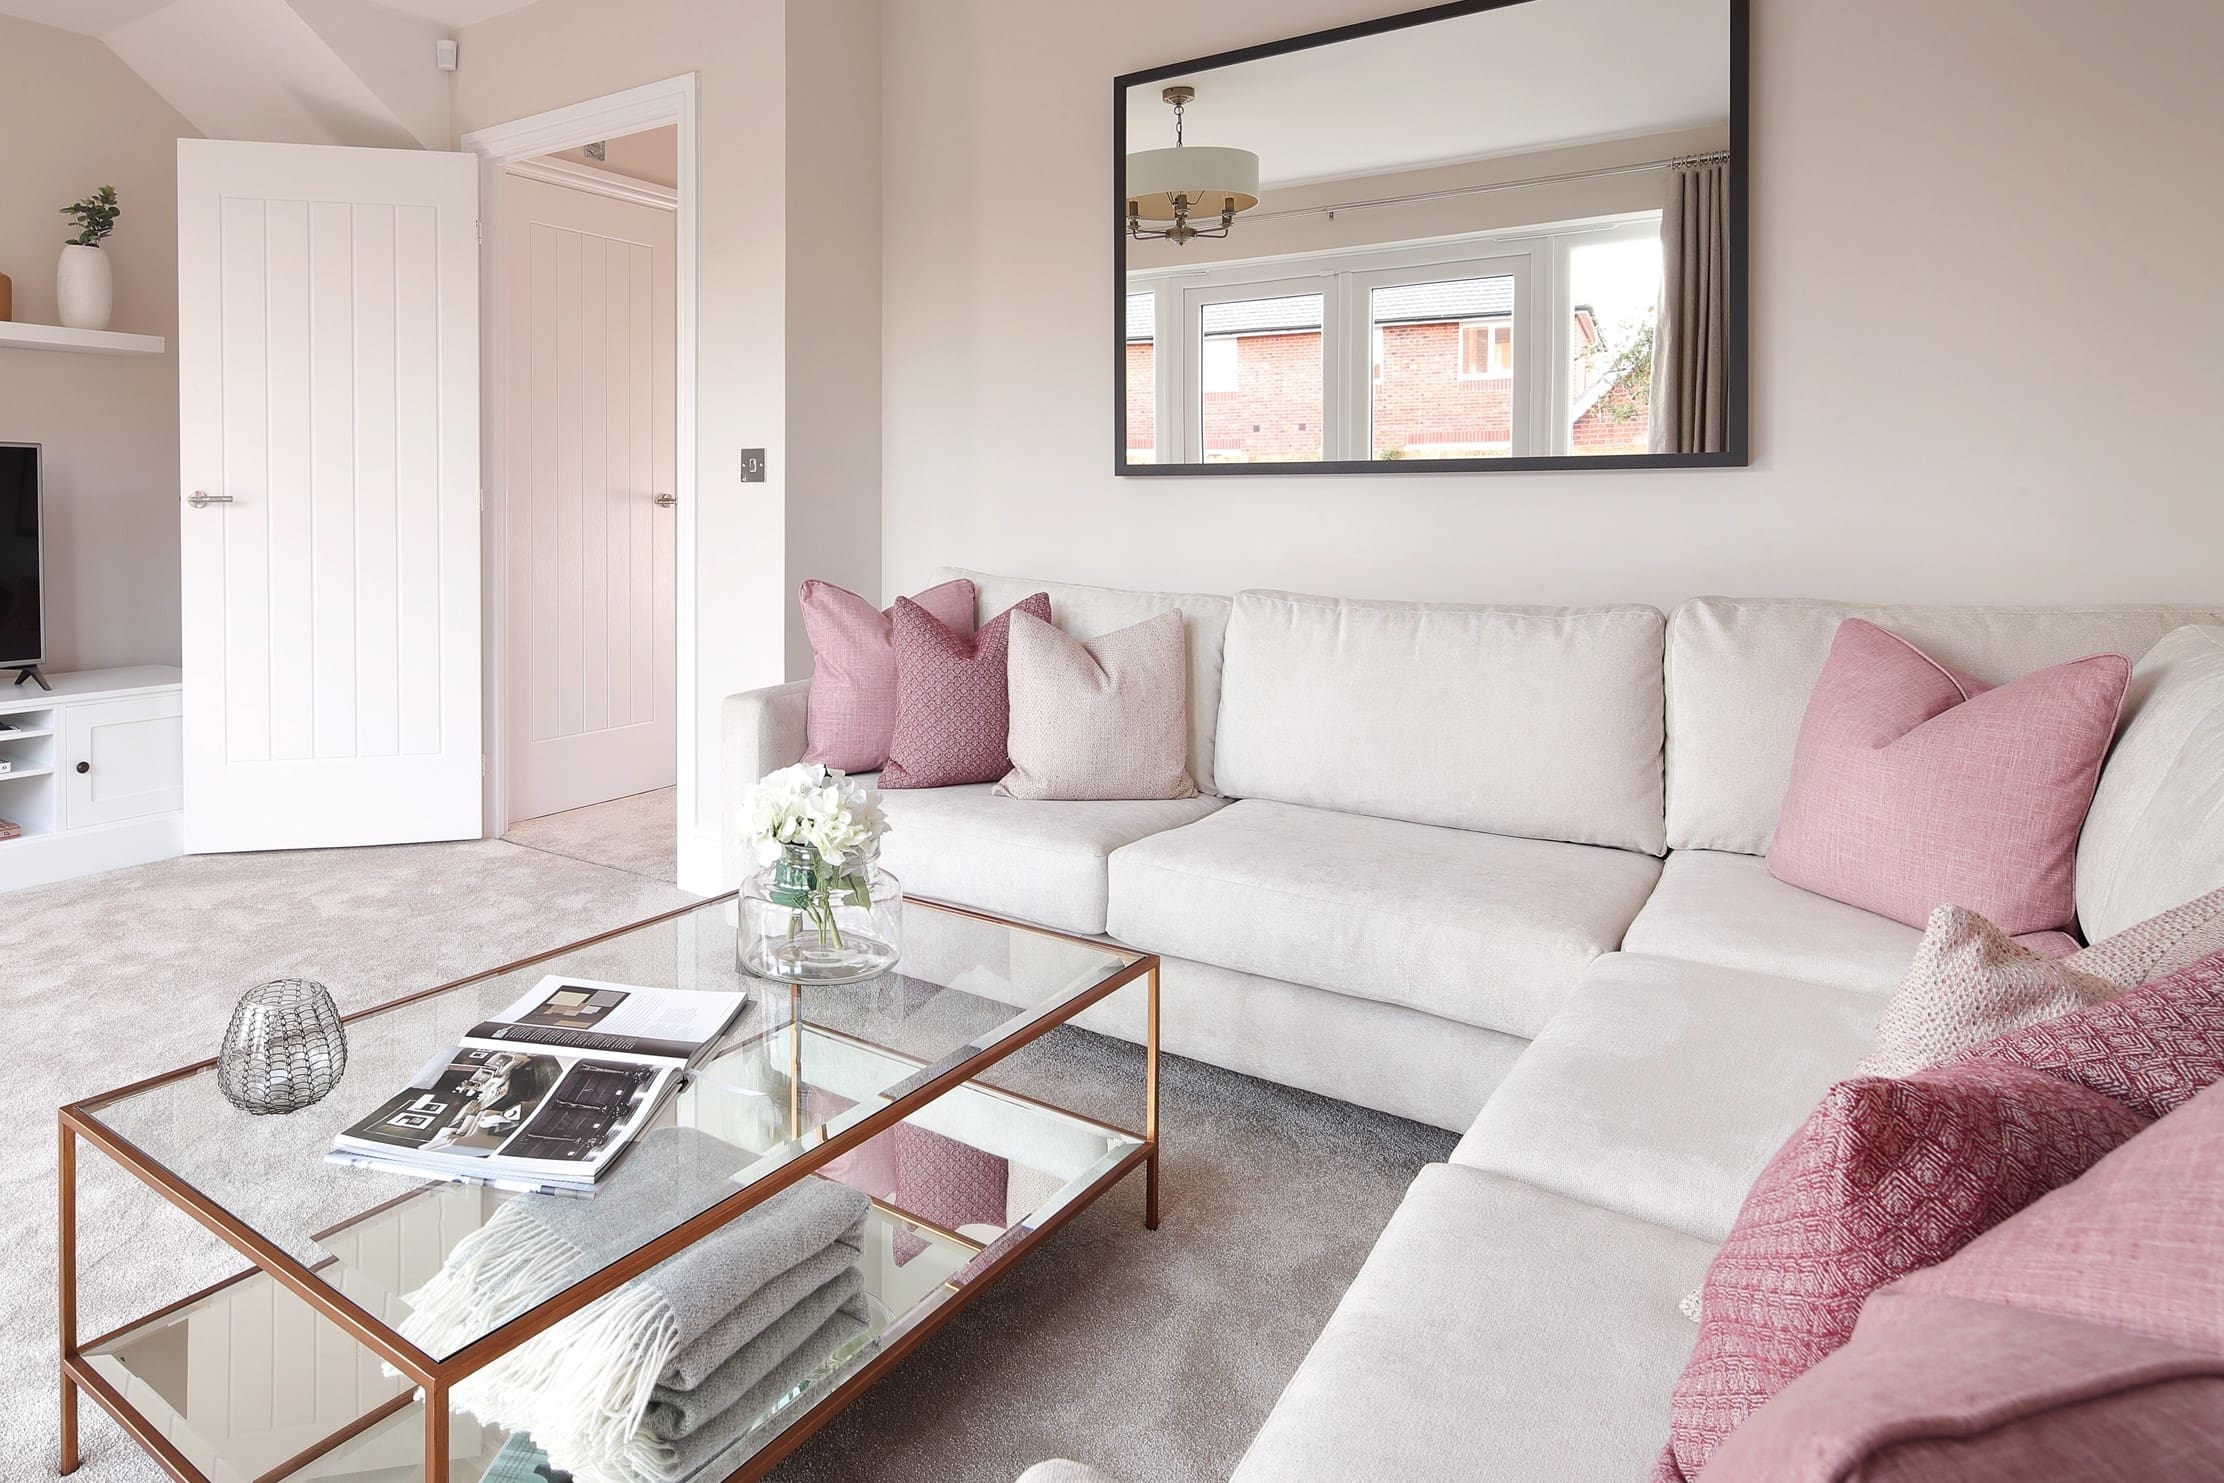 Key colour  trends for interior design in 2019  Property blog